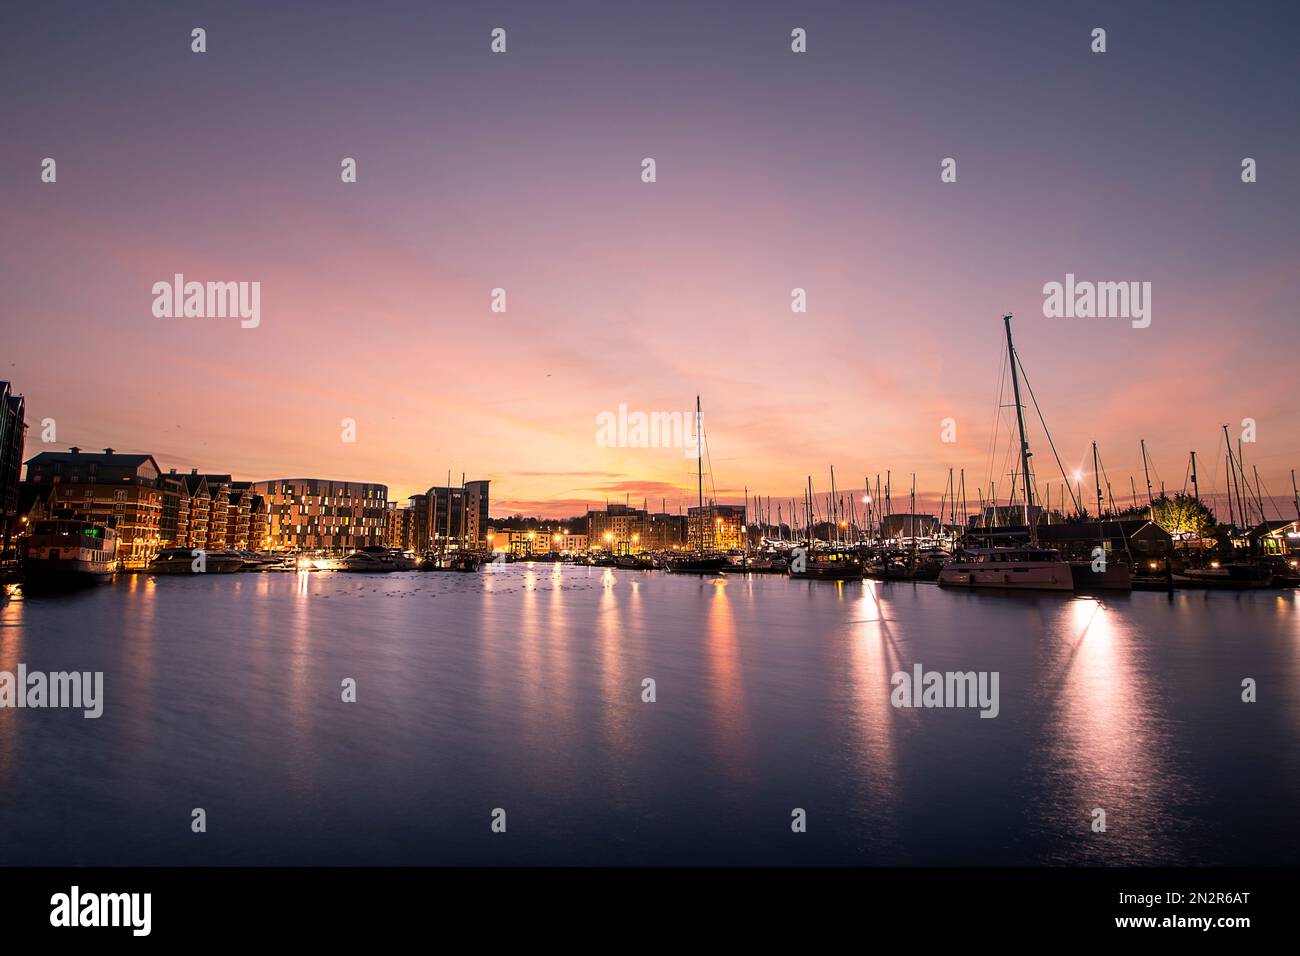 Early morning over the wet dock in Ipswich, UK Stock Photo